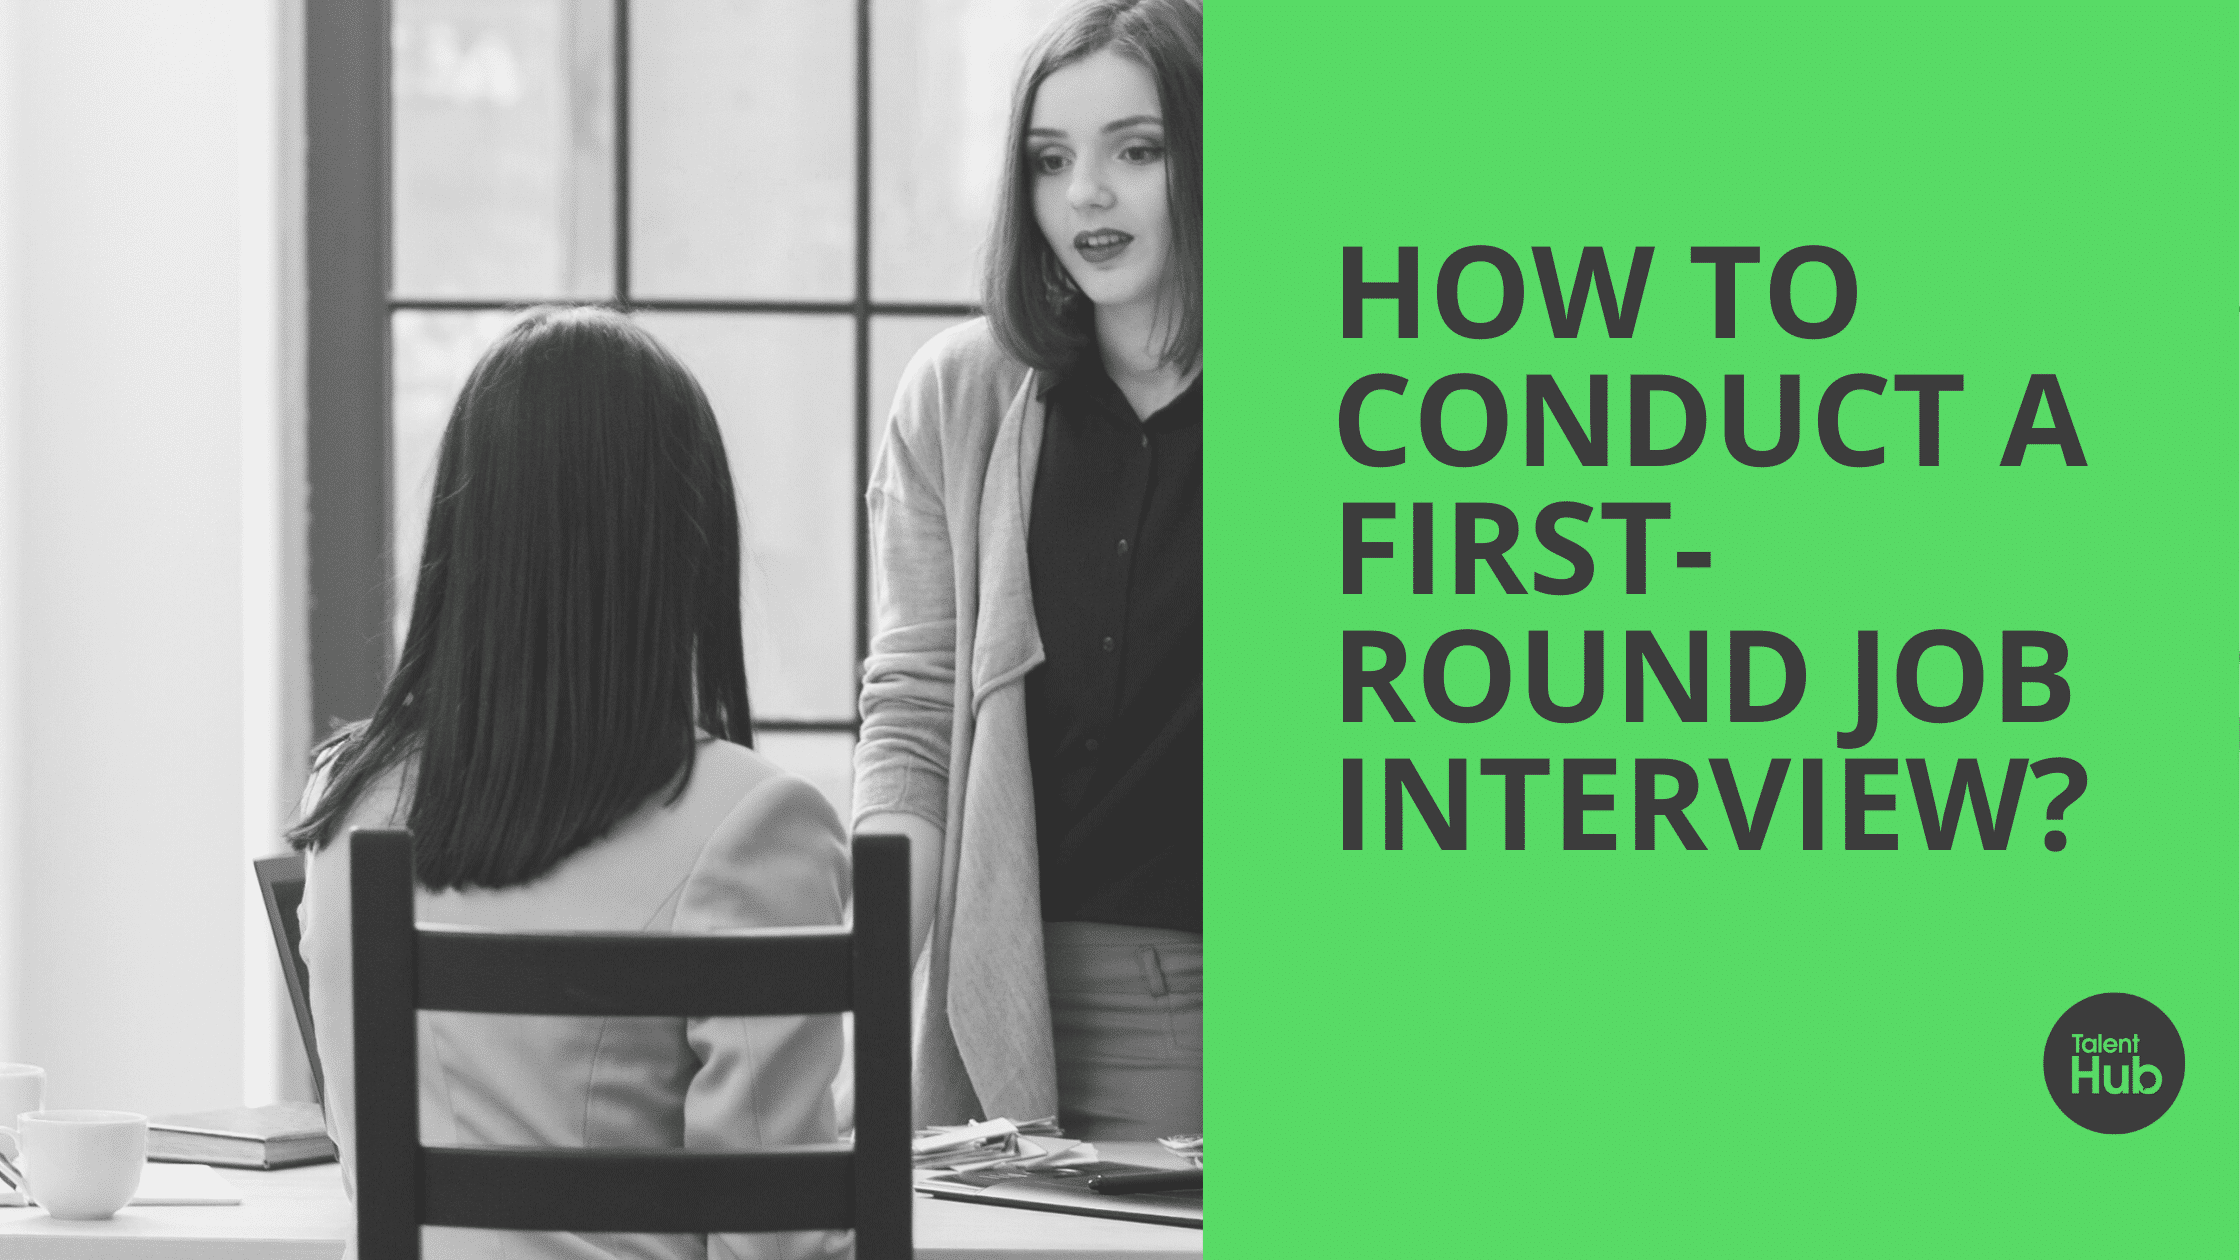 How to conduct a first round job interview